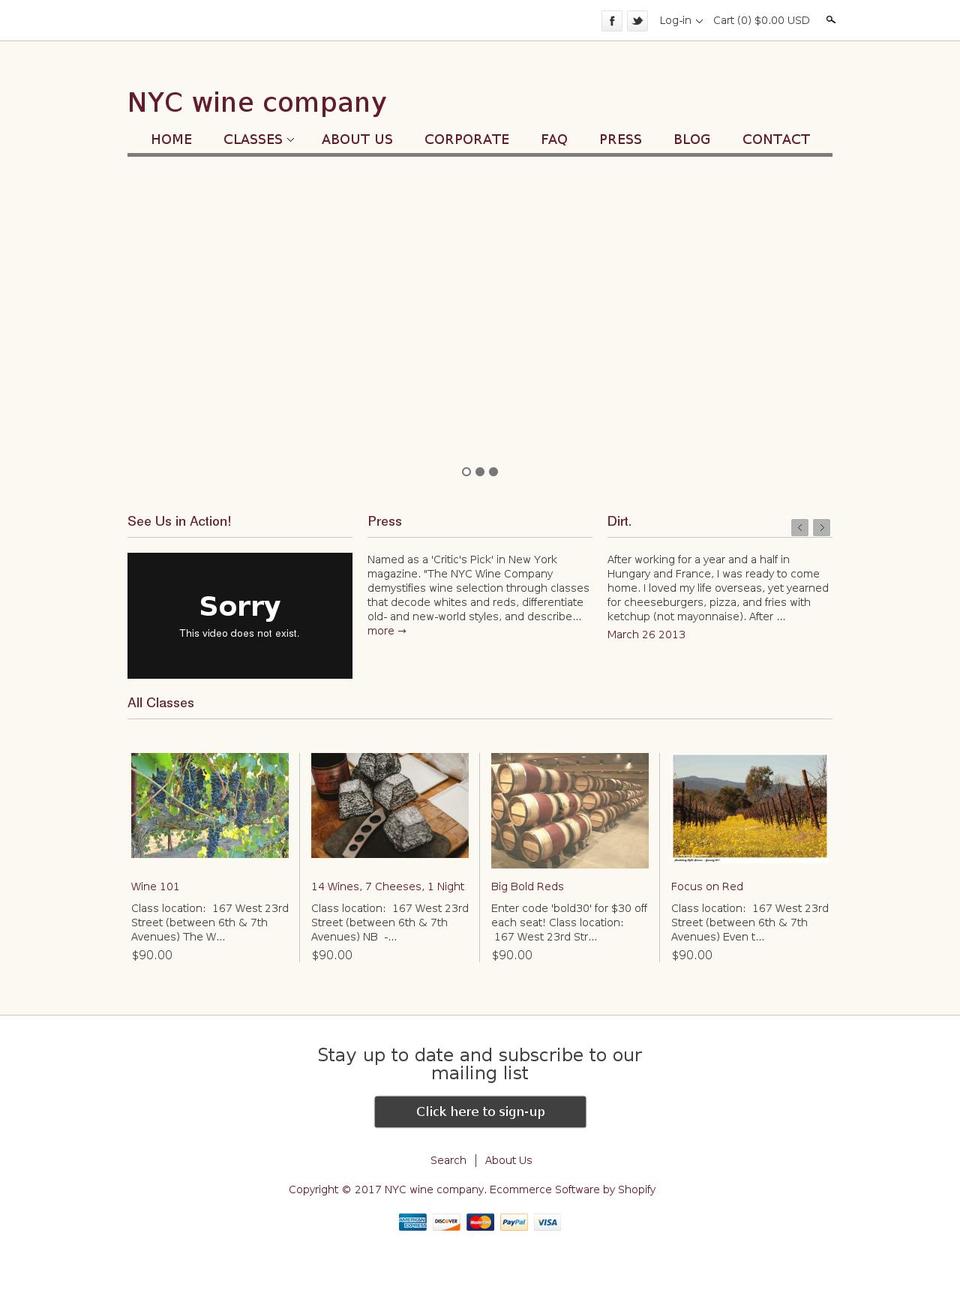 Clean Shopify theme site example nycwinecompany.com